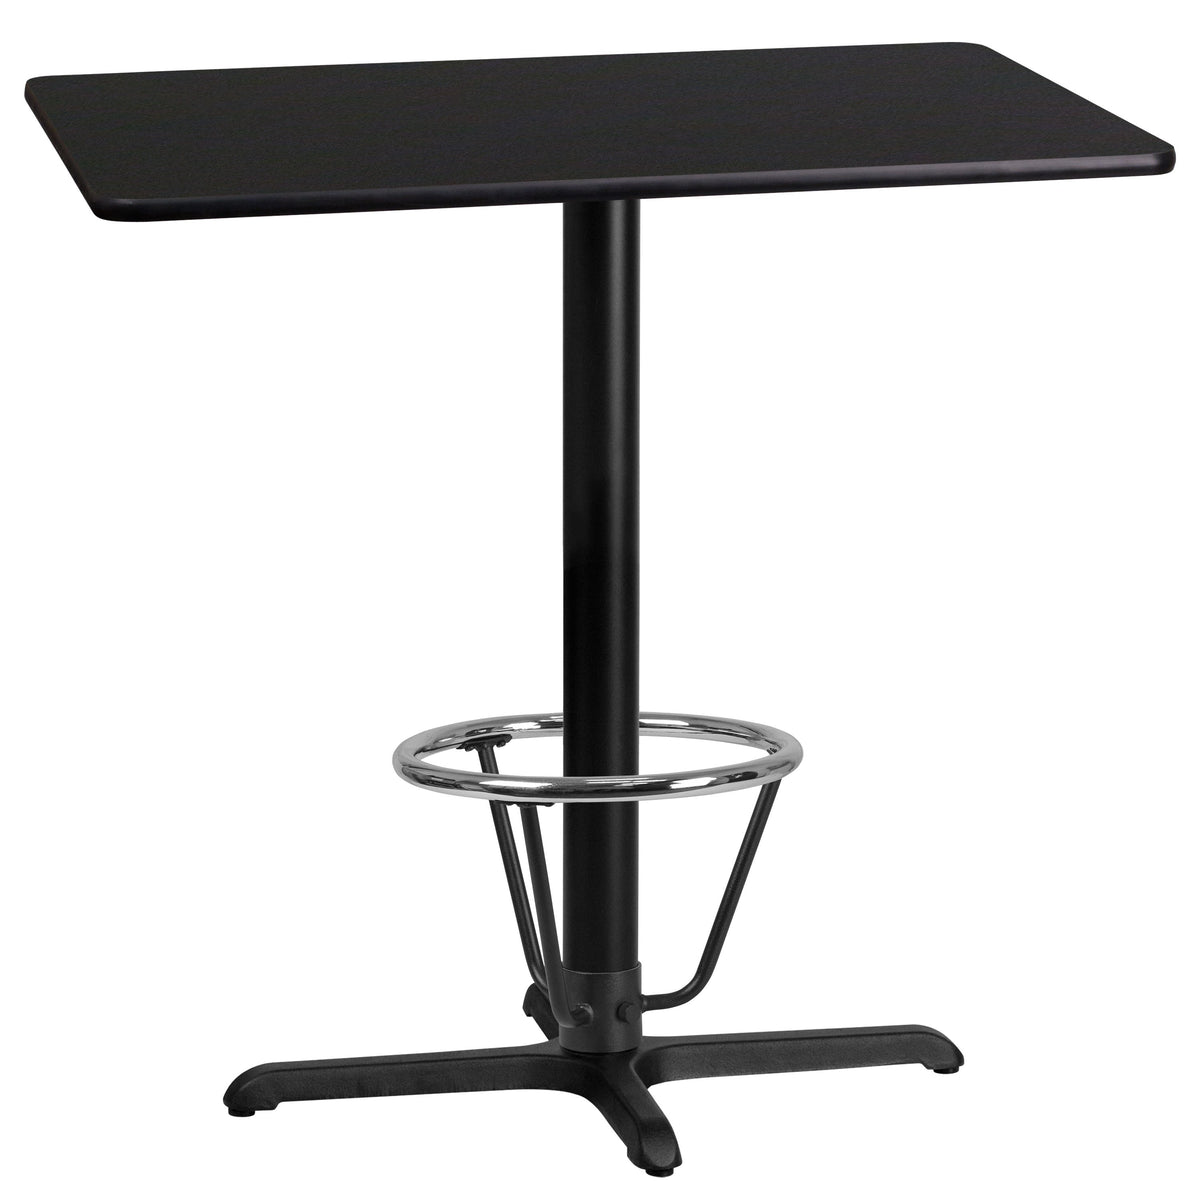 Black |#| 24inch x 42inch Rectangular Laminate Table Top & 23.5inch x 29.5inch Bar Height Table Base